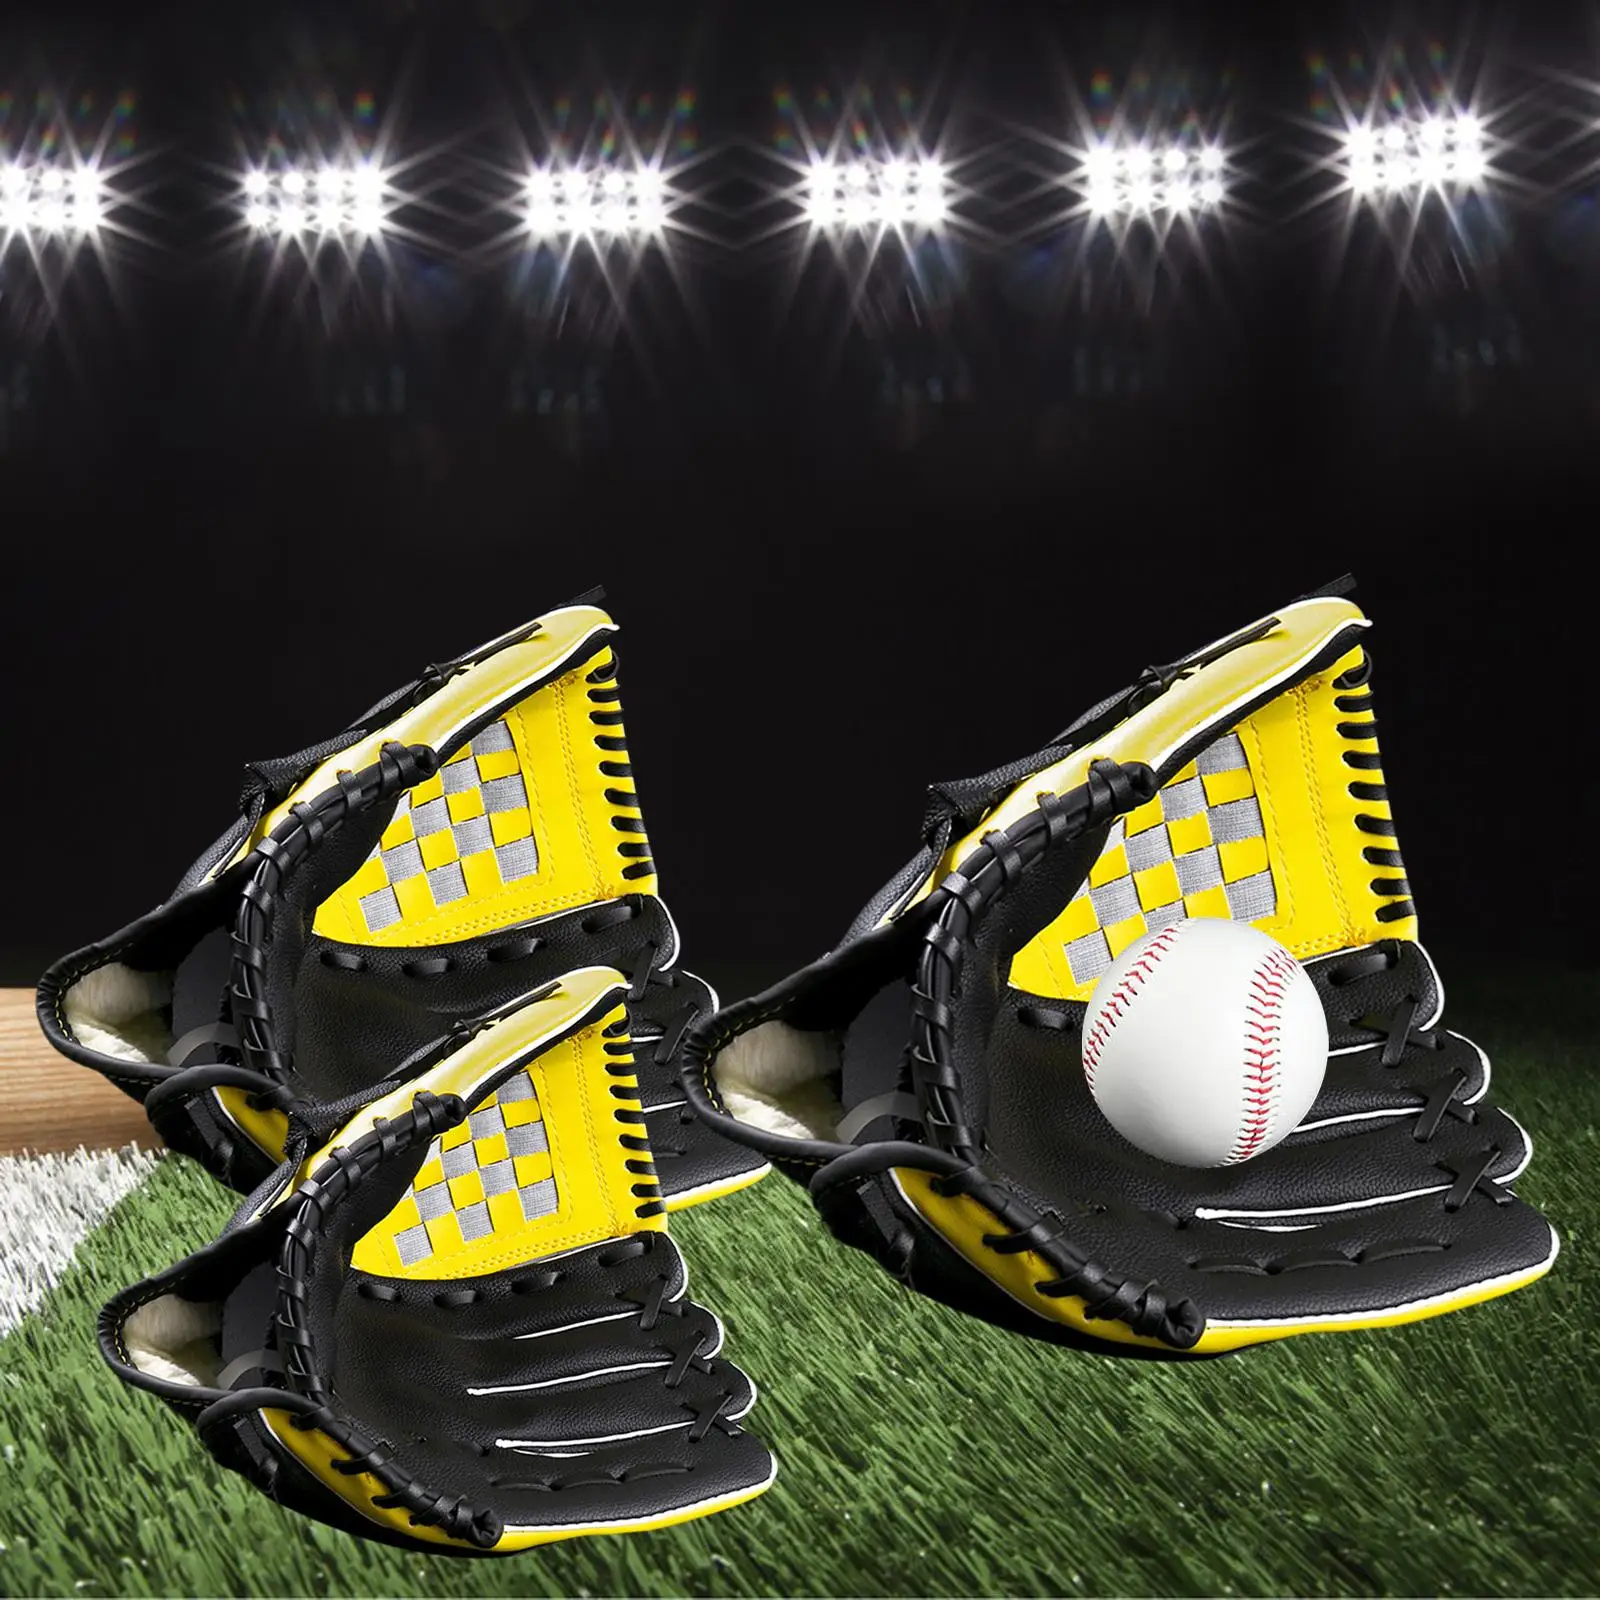 Baseball Glove Durable Catchers PU Teeball Gloves Right Handed Thrower for Training Practice Equipment Outdoor Sports